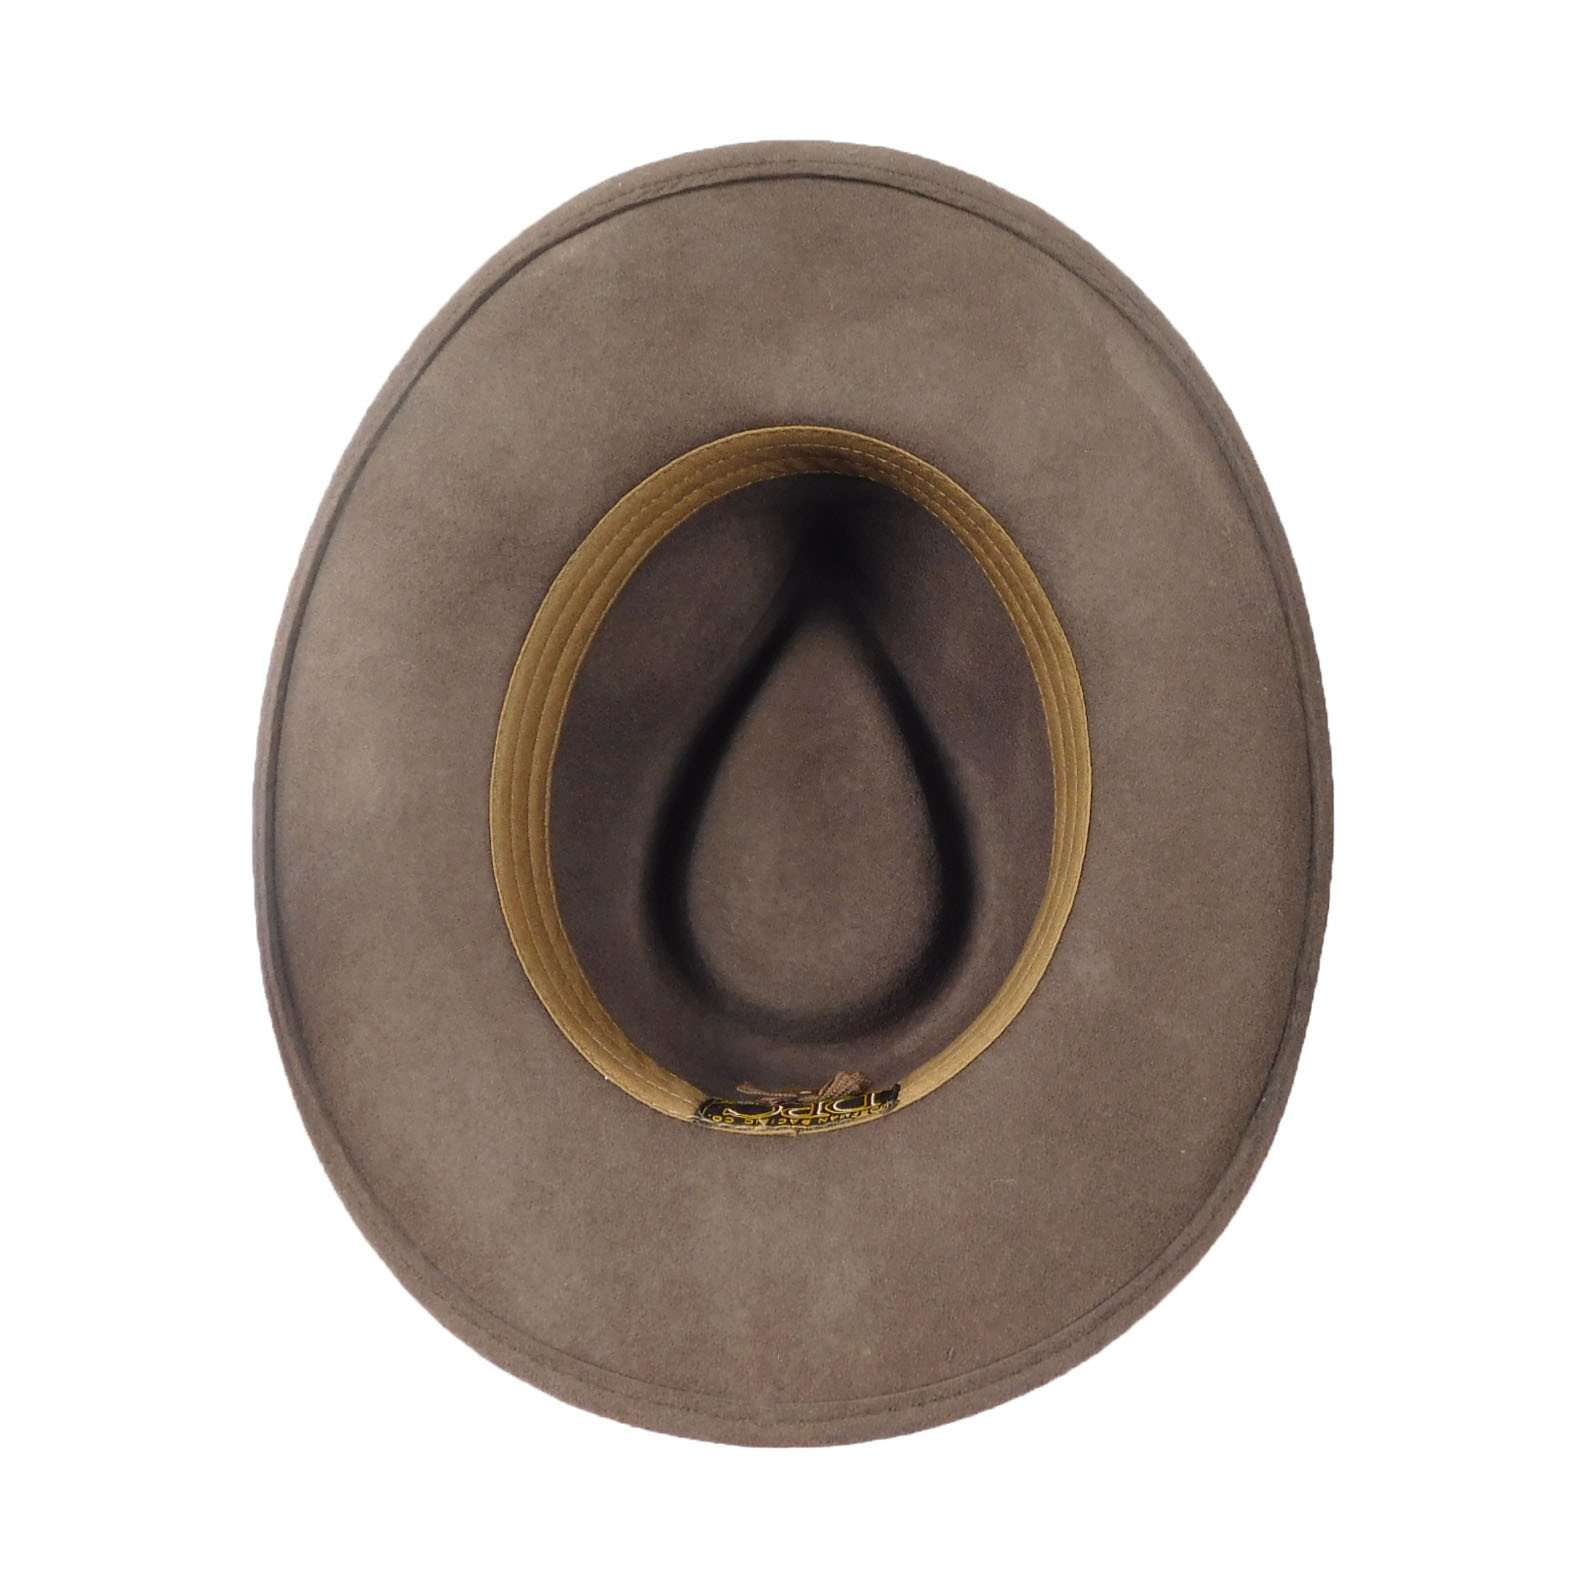 Wool Felt Outback with Leather Band Safari Hat Dorfman Hat Co.    